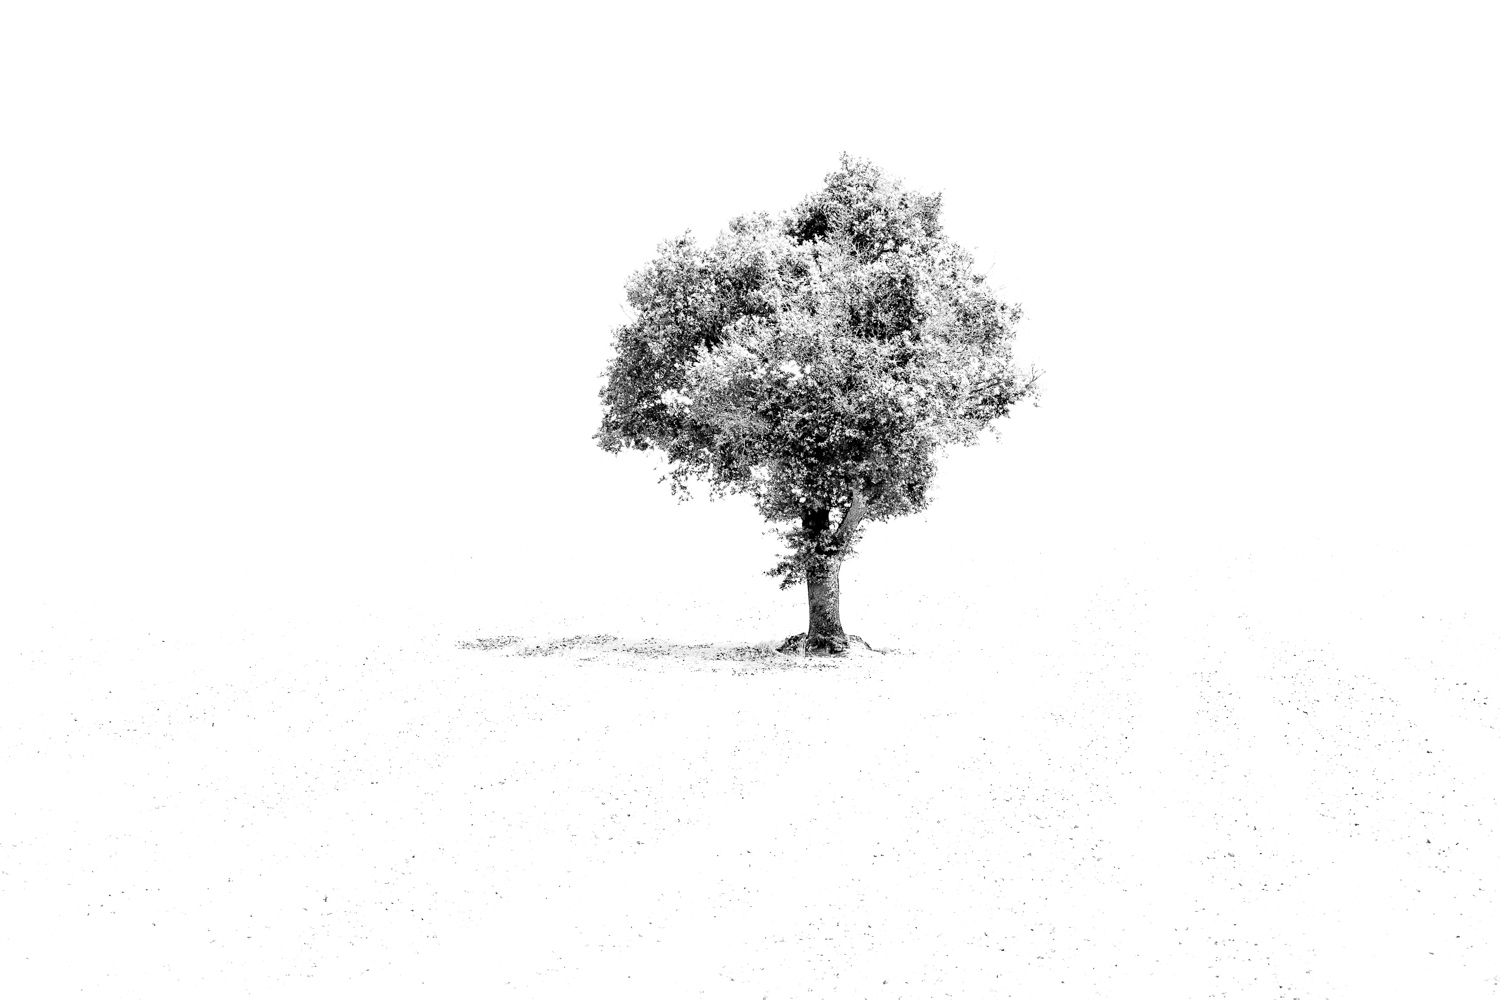 Black- and white image of a tree, standing totally alone in the field. Minimalistic image by Karen Ketels